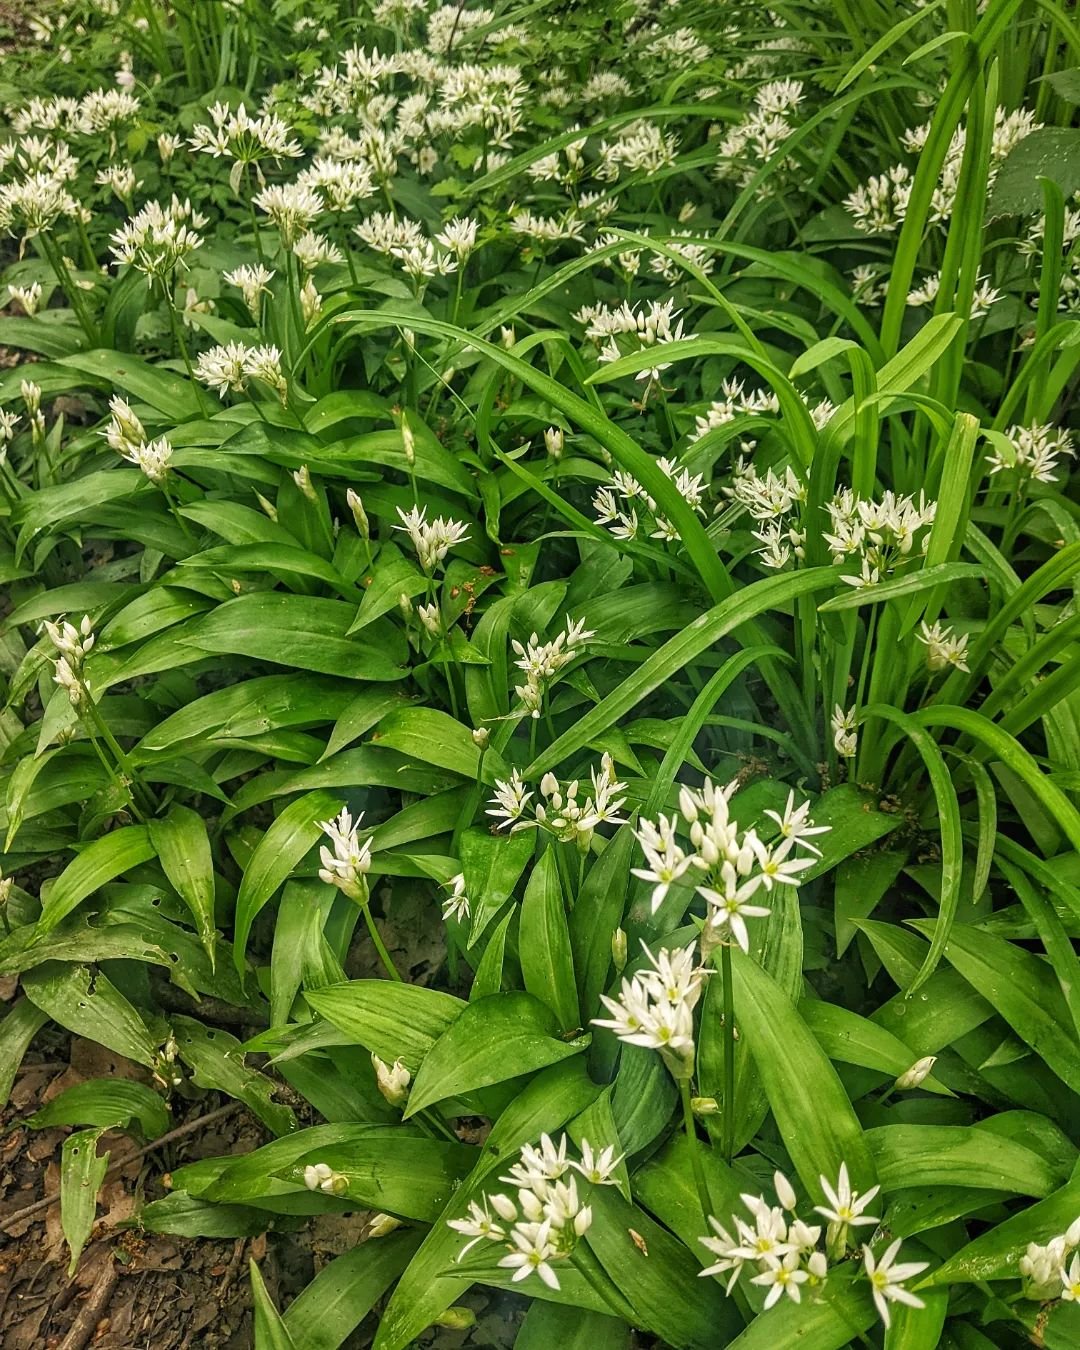 April means WILD GARLIC 🌱 making the most of the season by creating a few different wild garlic based dishes for my clients this week 🧡